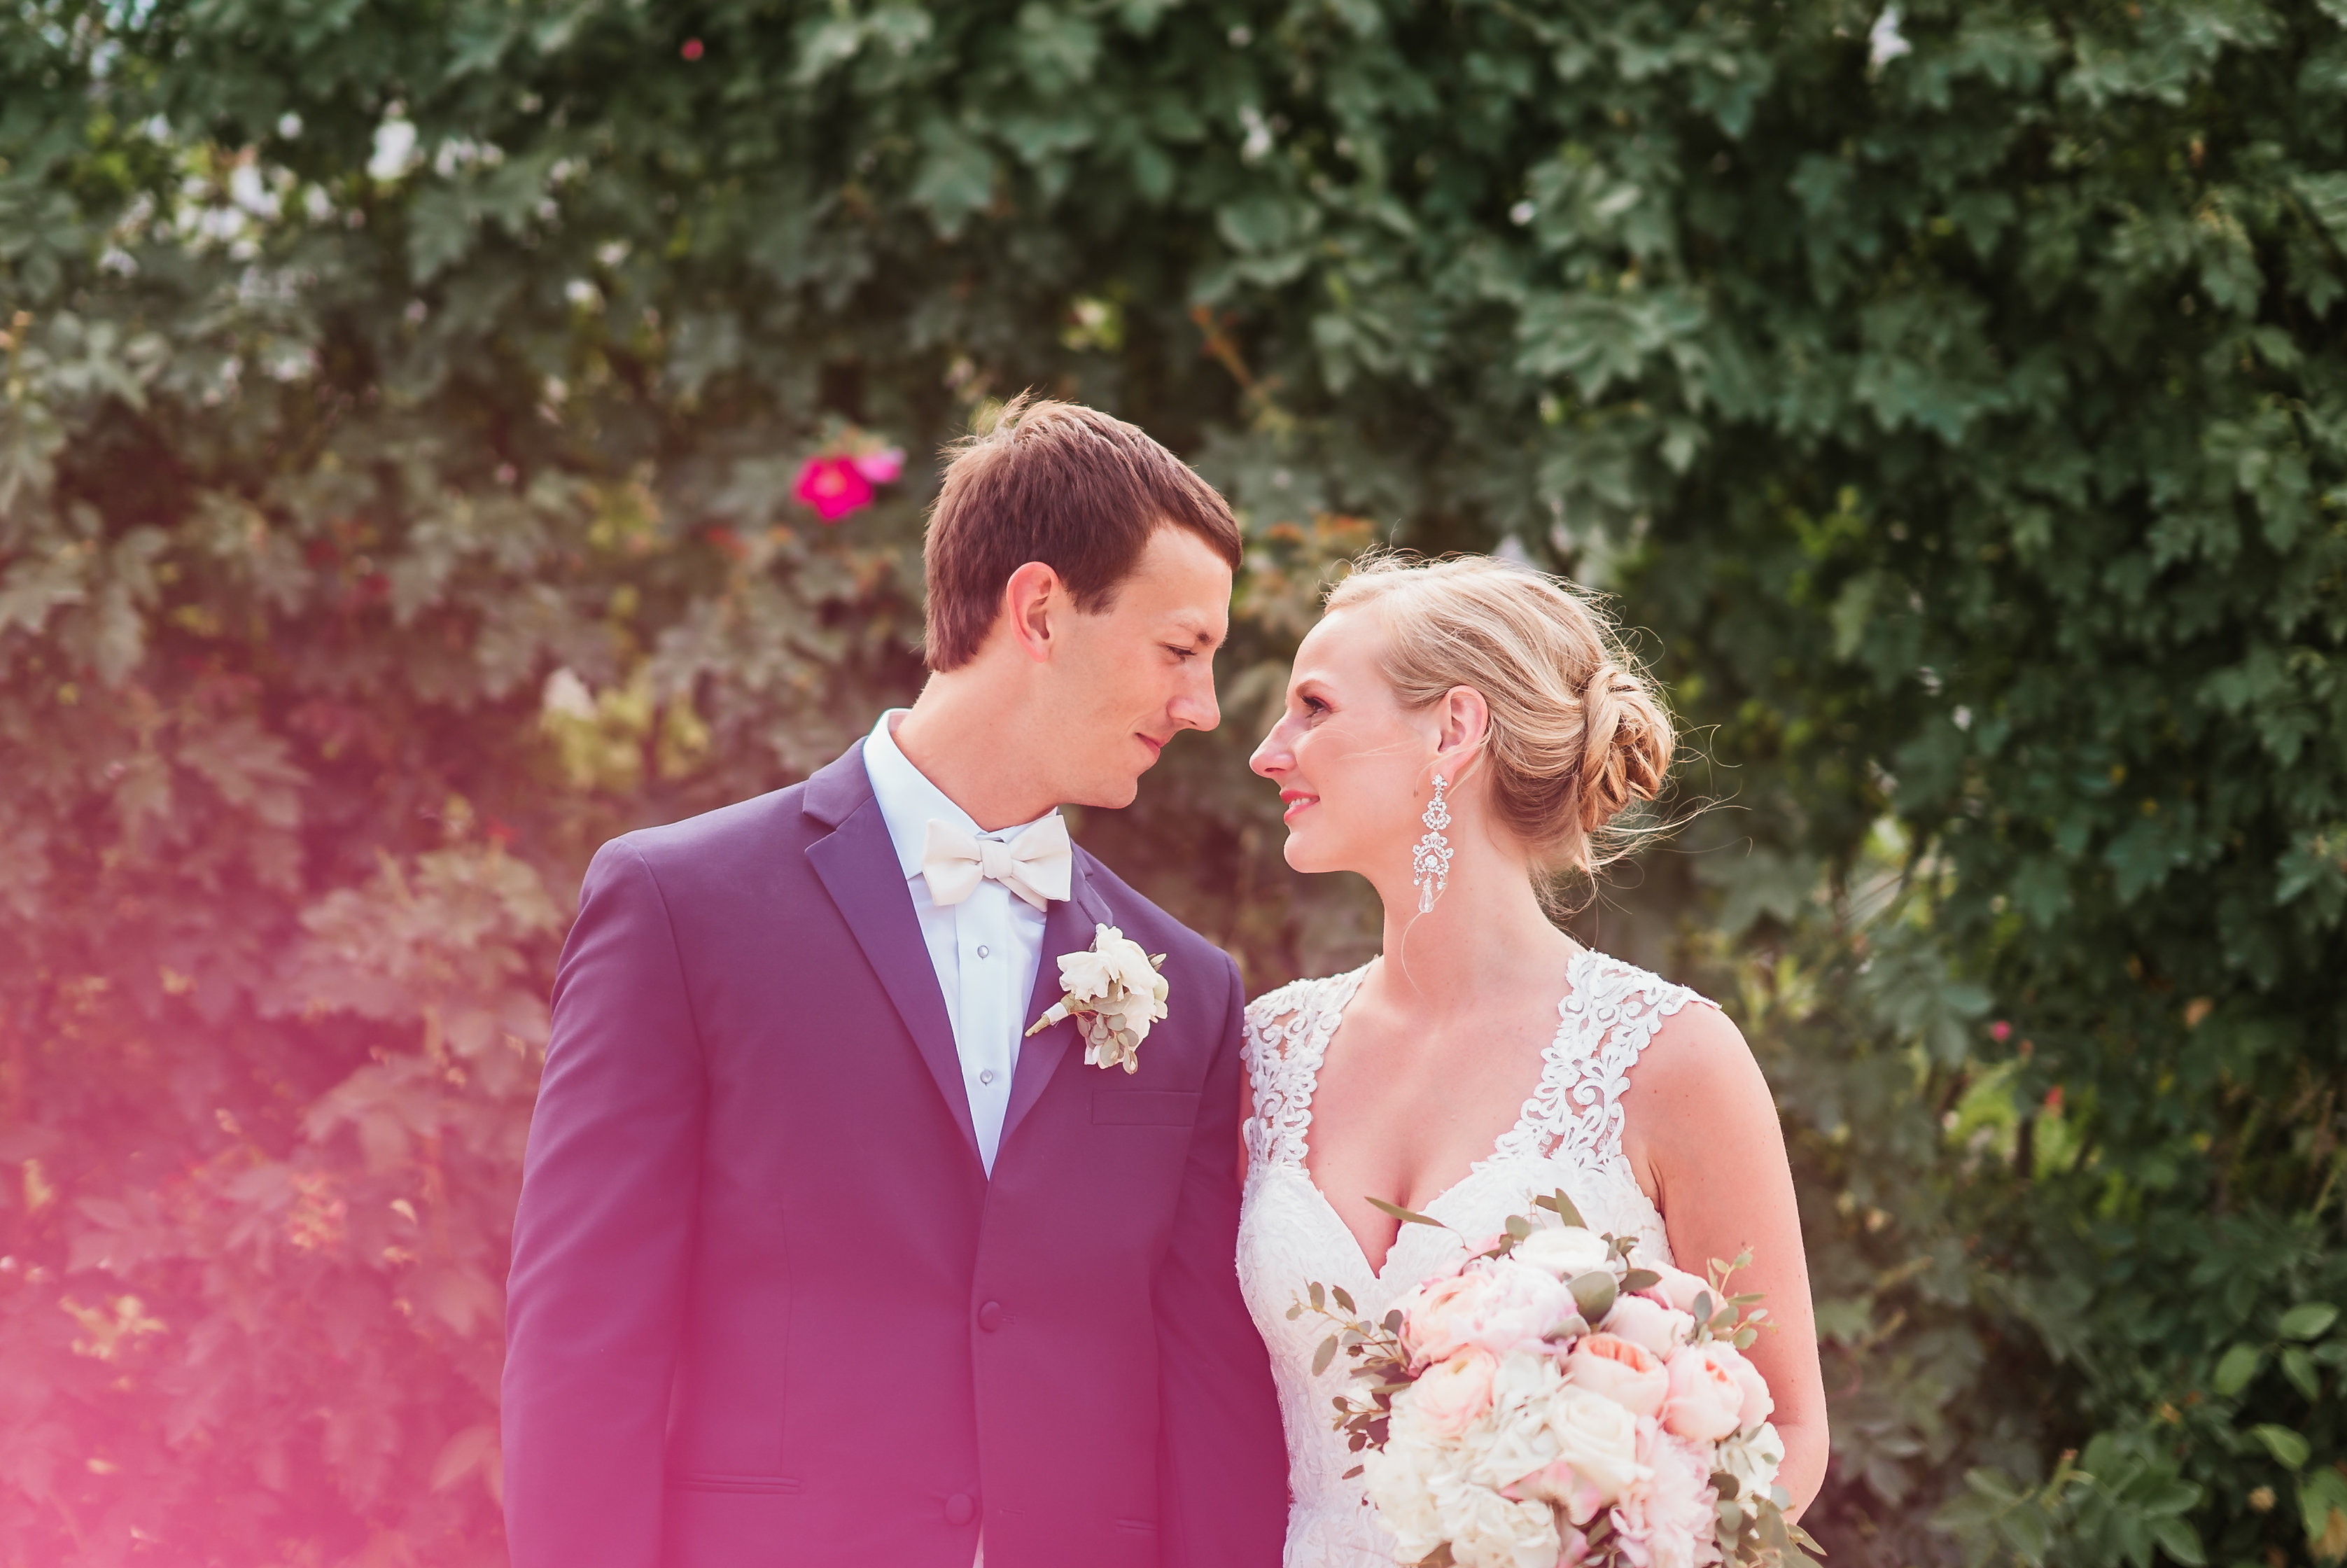 Smale Park wedding photos with blush pink flowers in brides bouquet